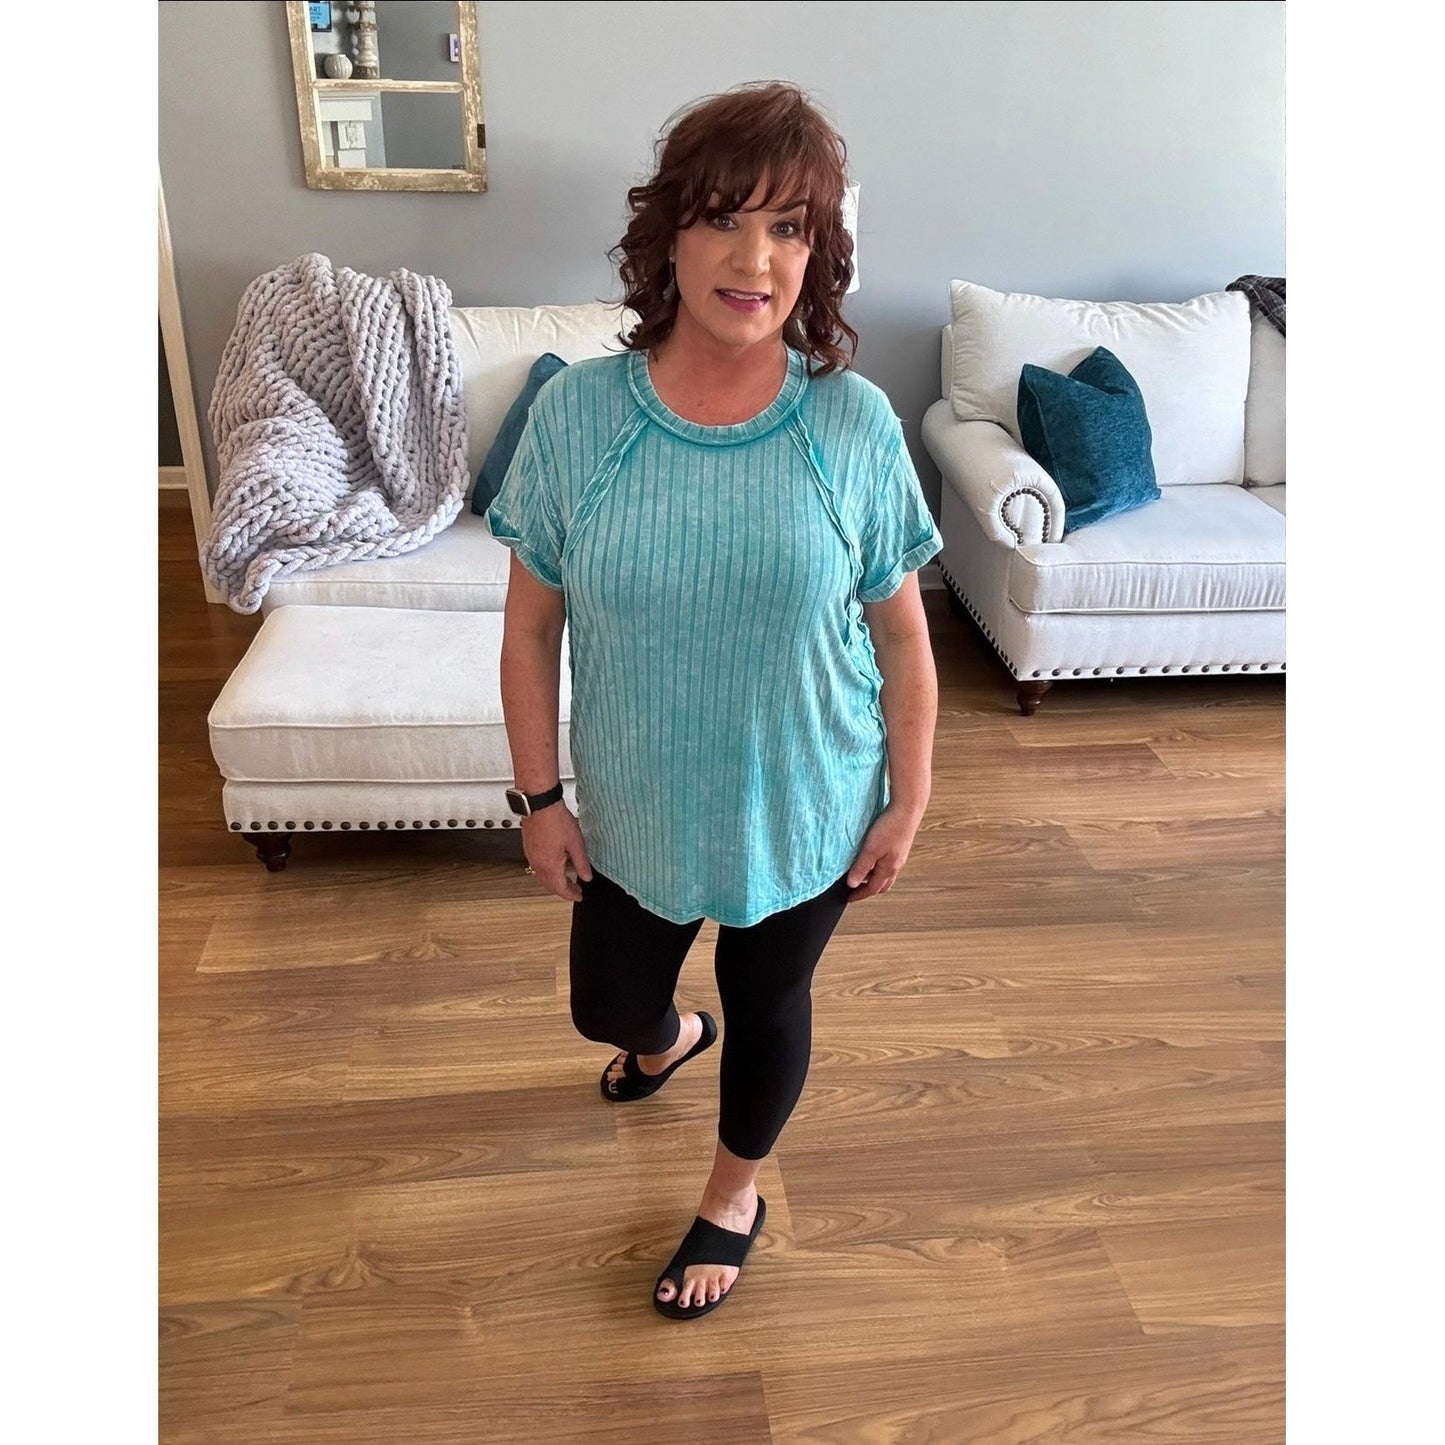 The Ava Teal Top